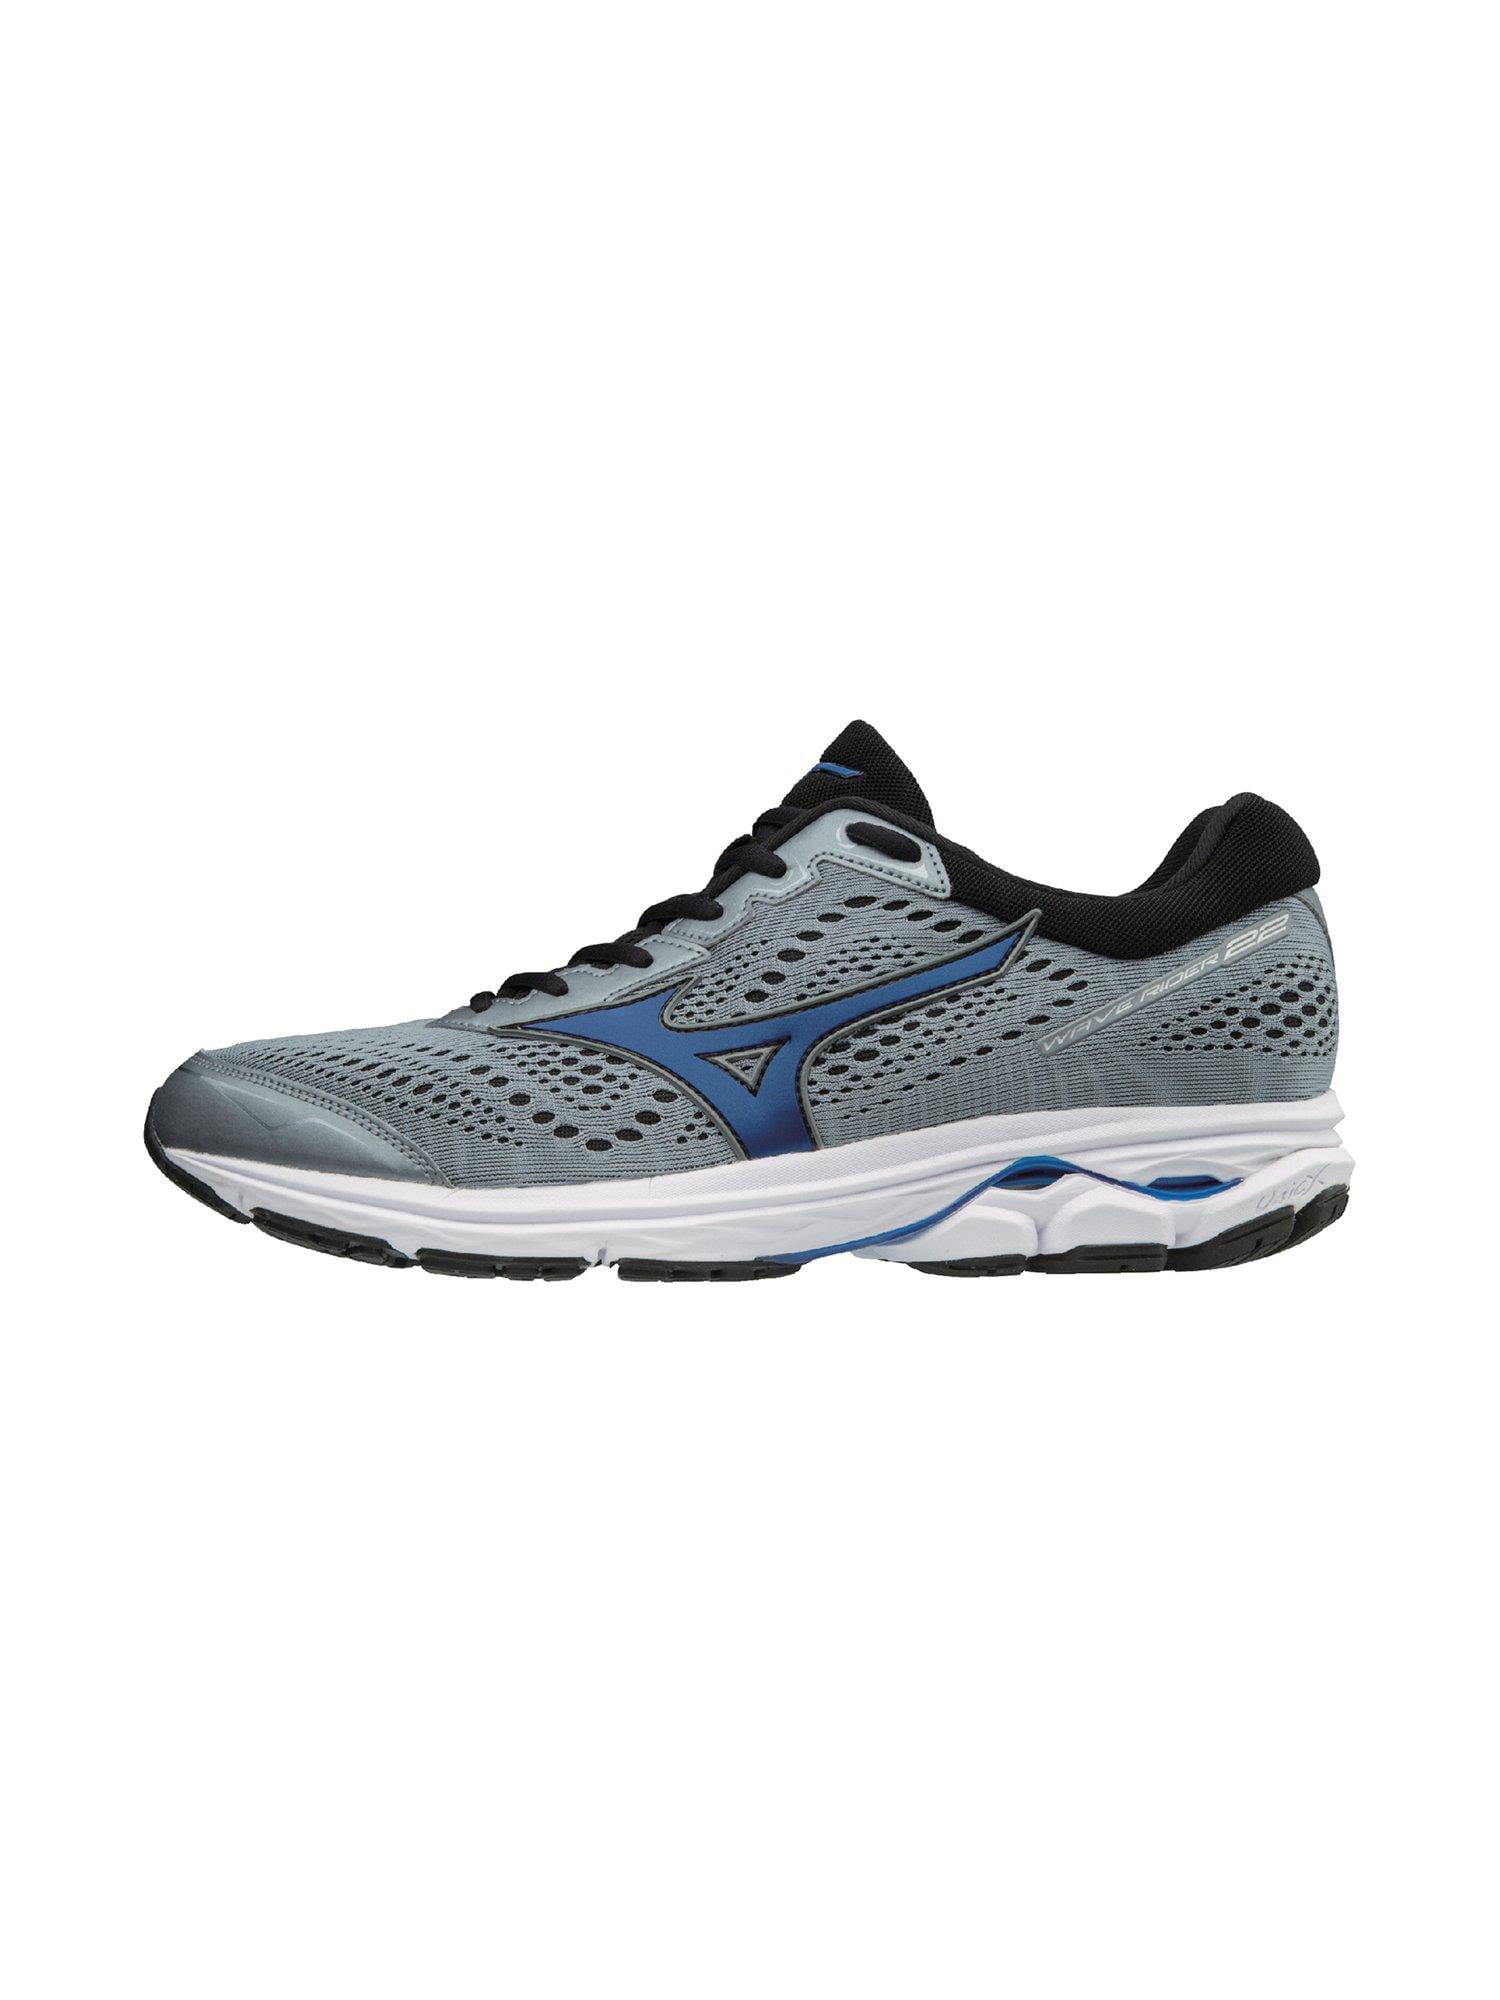 Blue Details about   Mizuno Wave Sonic 2 Mens Running Shoes 